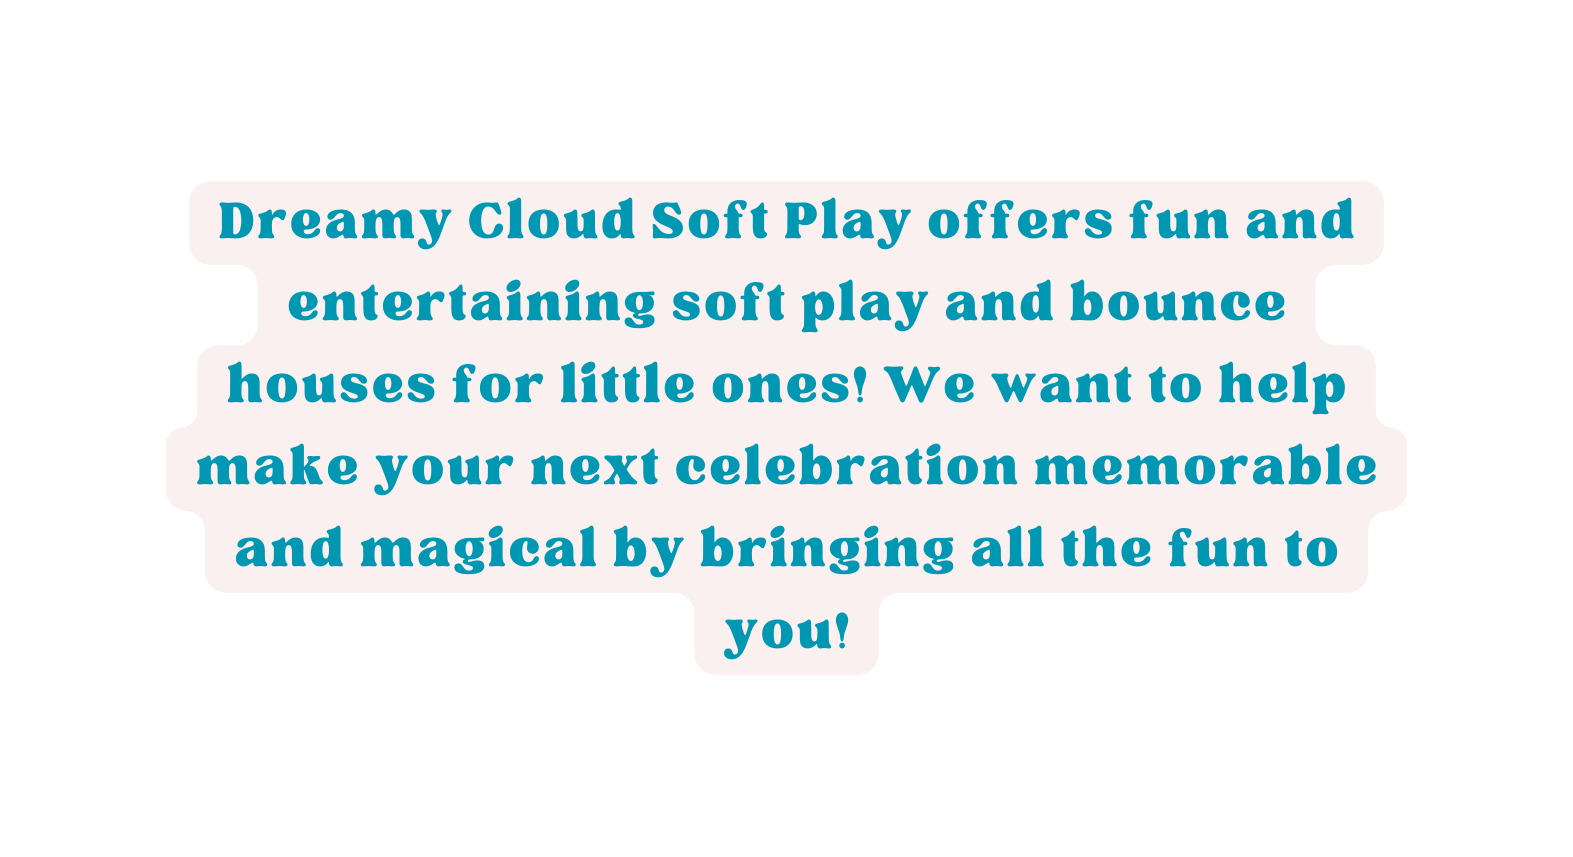 Dreamy Cloud Soft Play offers fun and entertaining soft play and bounce houses for little ones We want to help make your next celebration memorable and magical by bringing all the fun to you